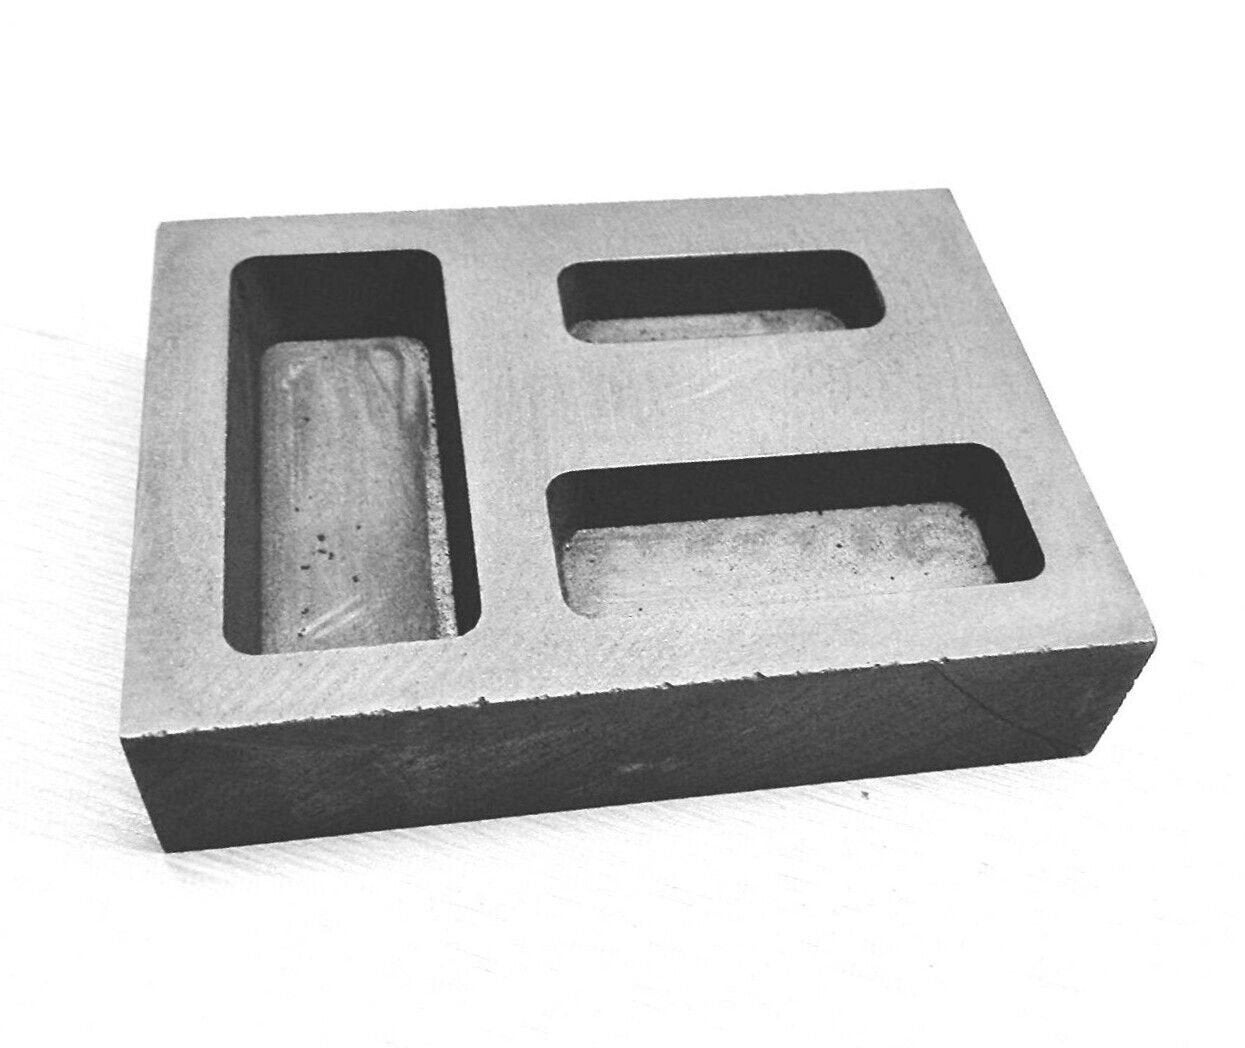 Graphite Ingot 1/4, 1/2 1 oz. Gold Bar Combo Mold Casting Melting Refining  Scrap - JETS INC. - Jewelers Equipment Tools and Supplies